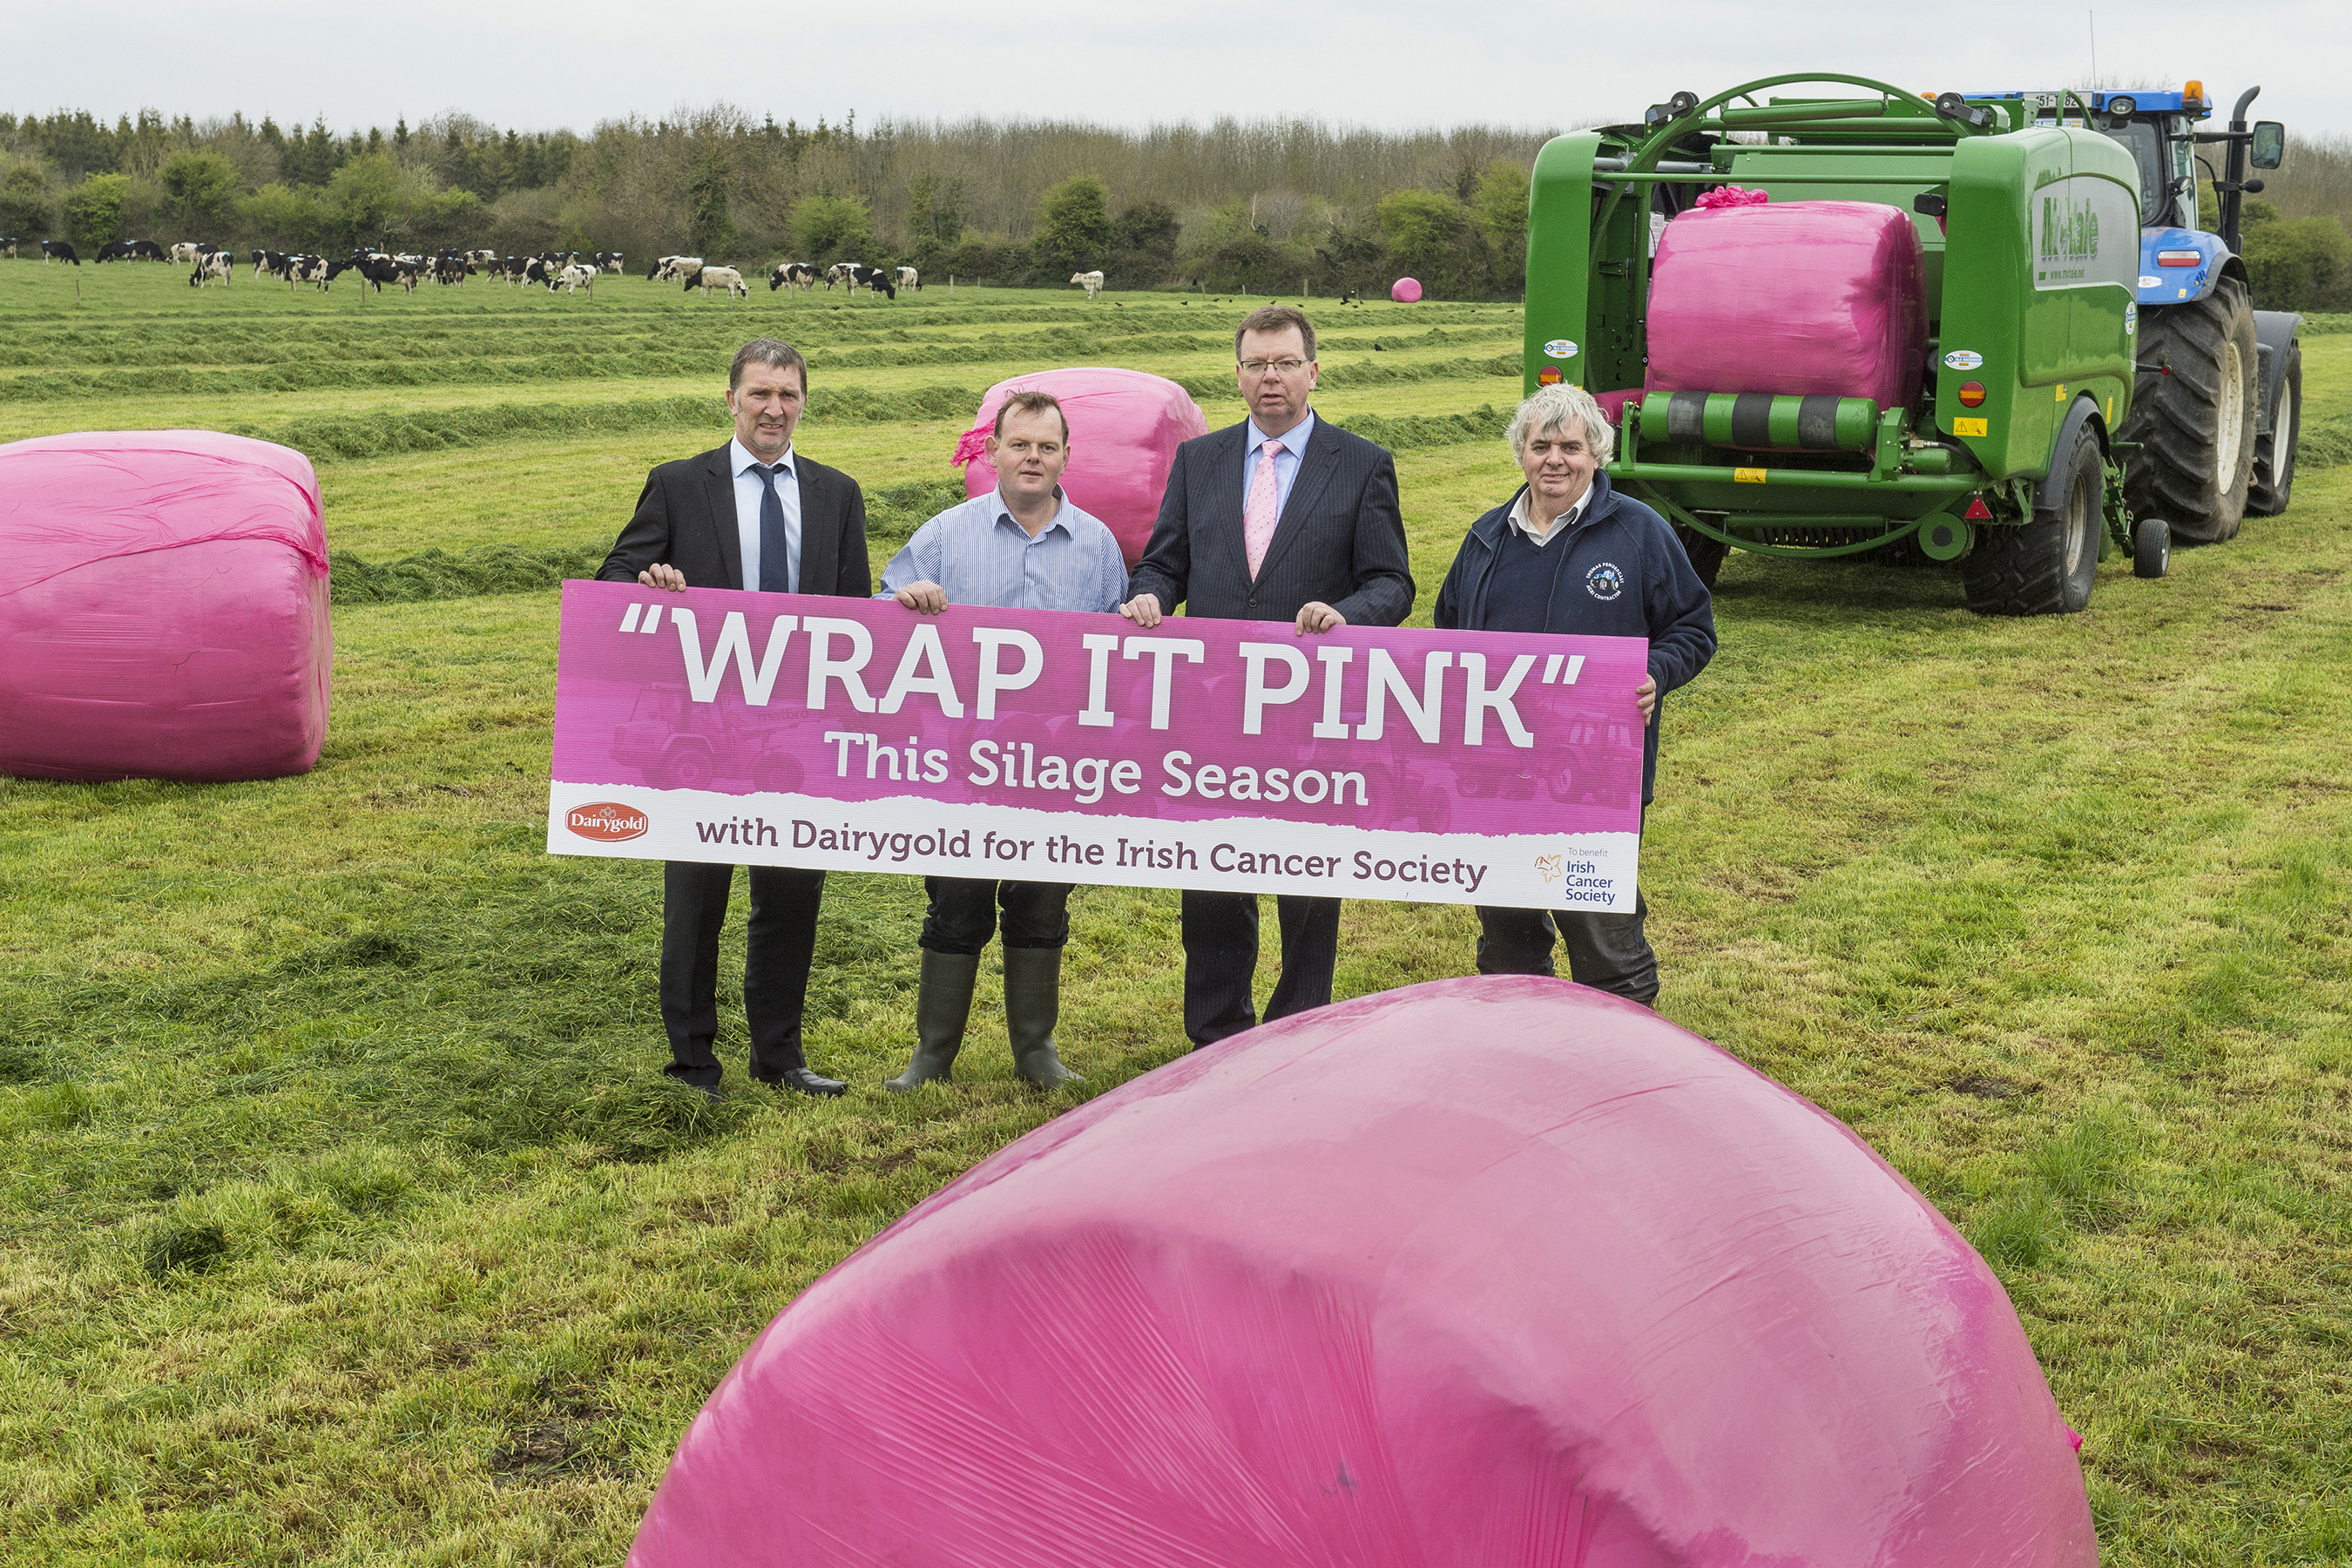 Dairygold wrap it pink